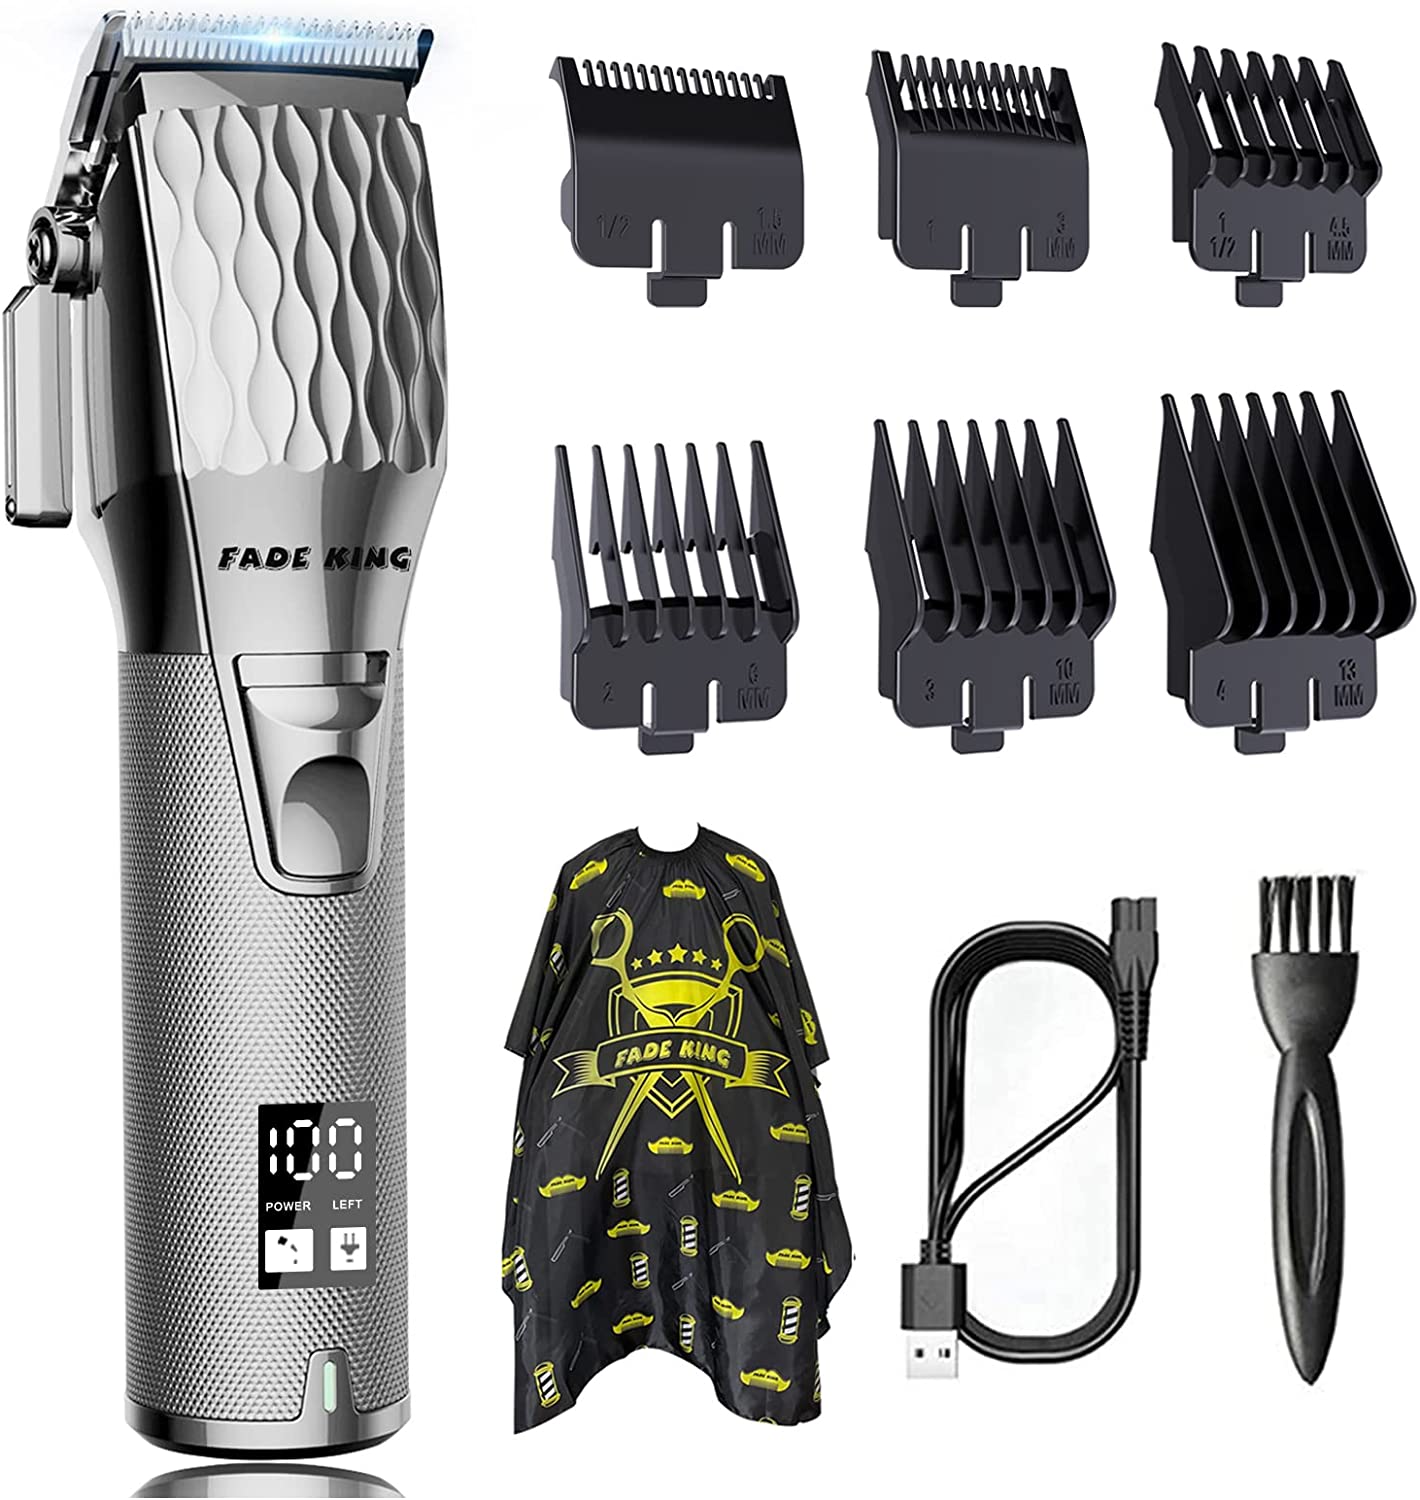 FADEKING Professional Men's Hair Clippers and Trimmer Set